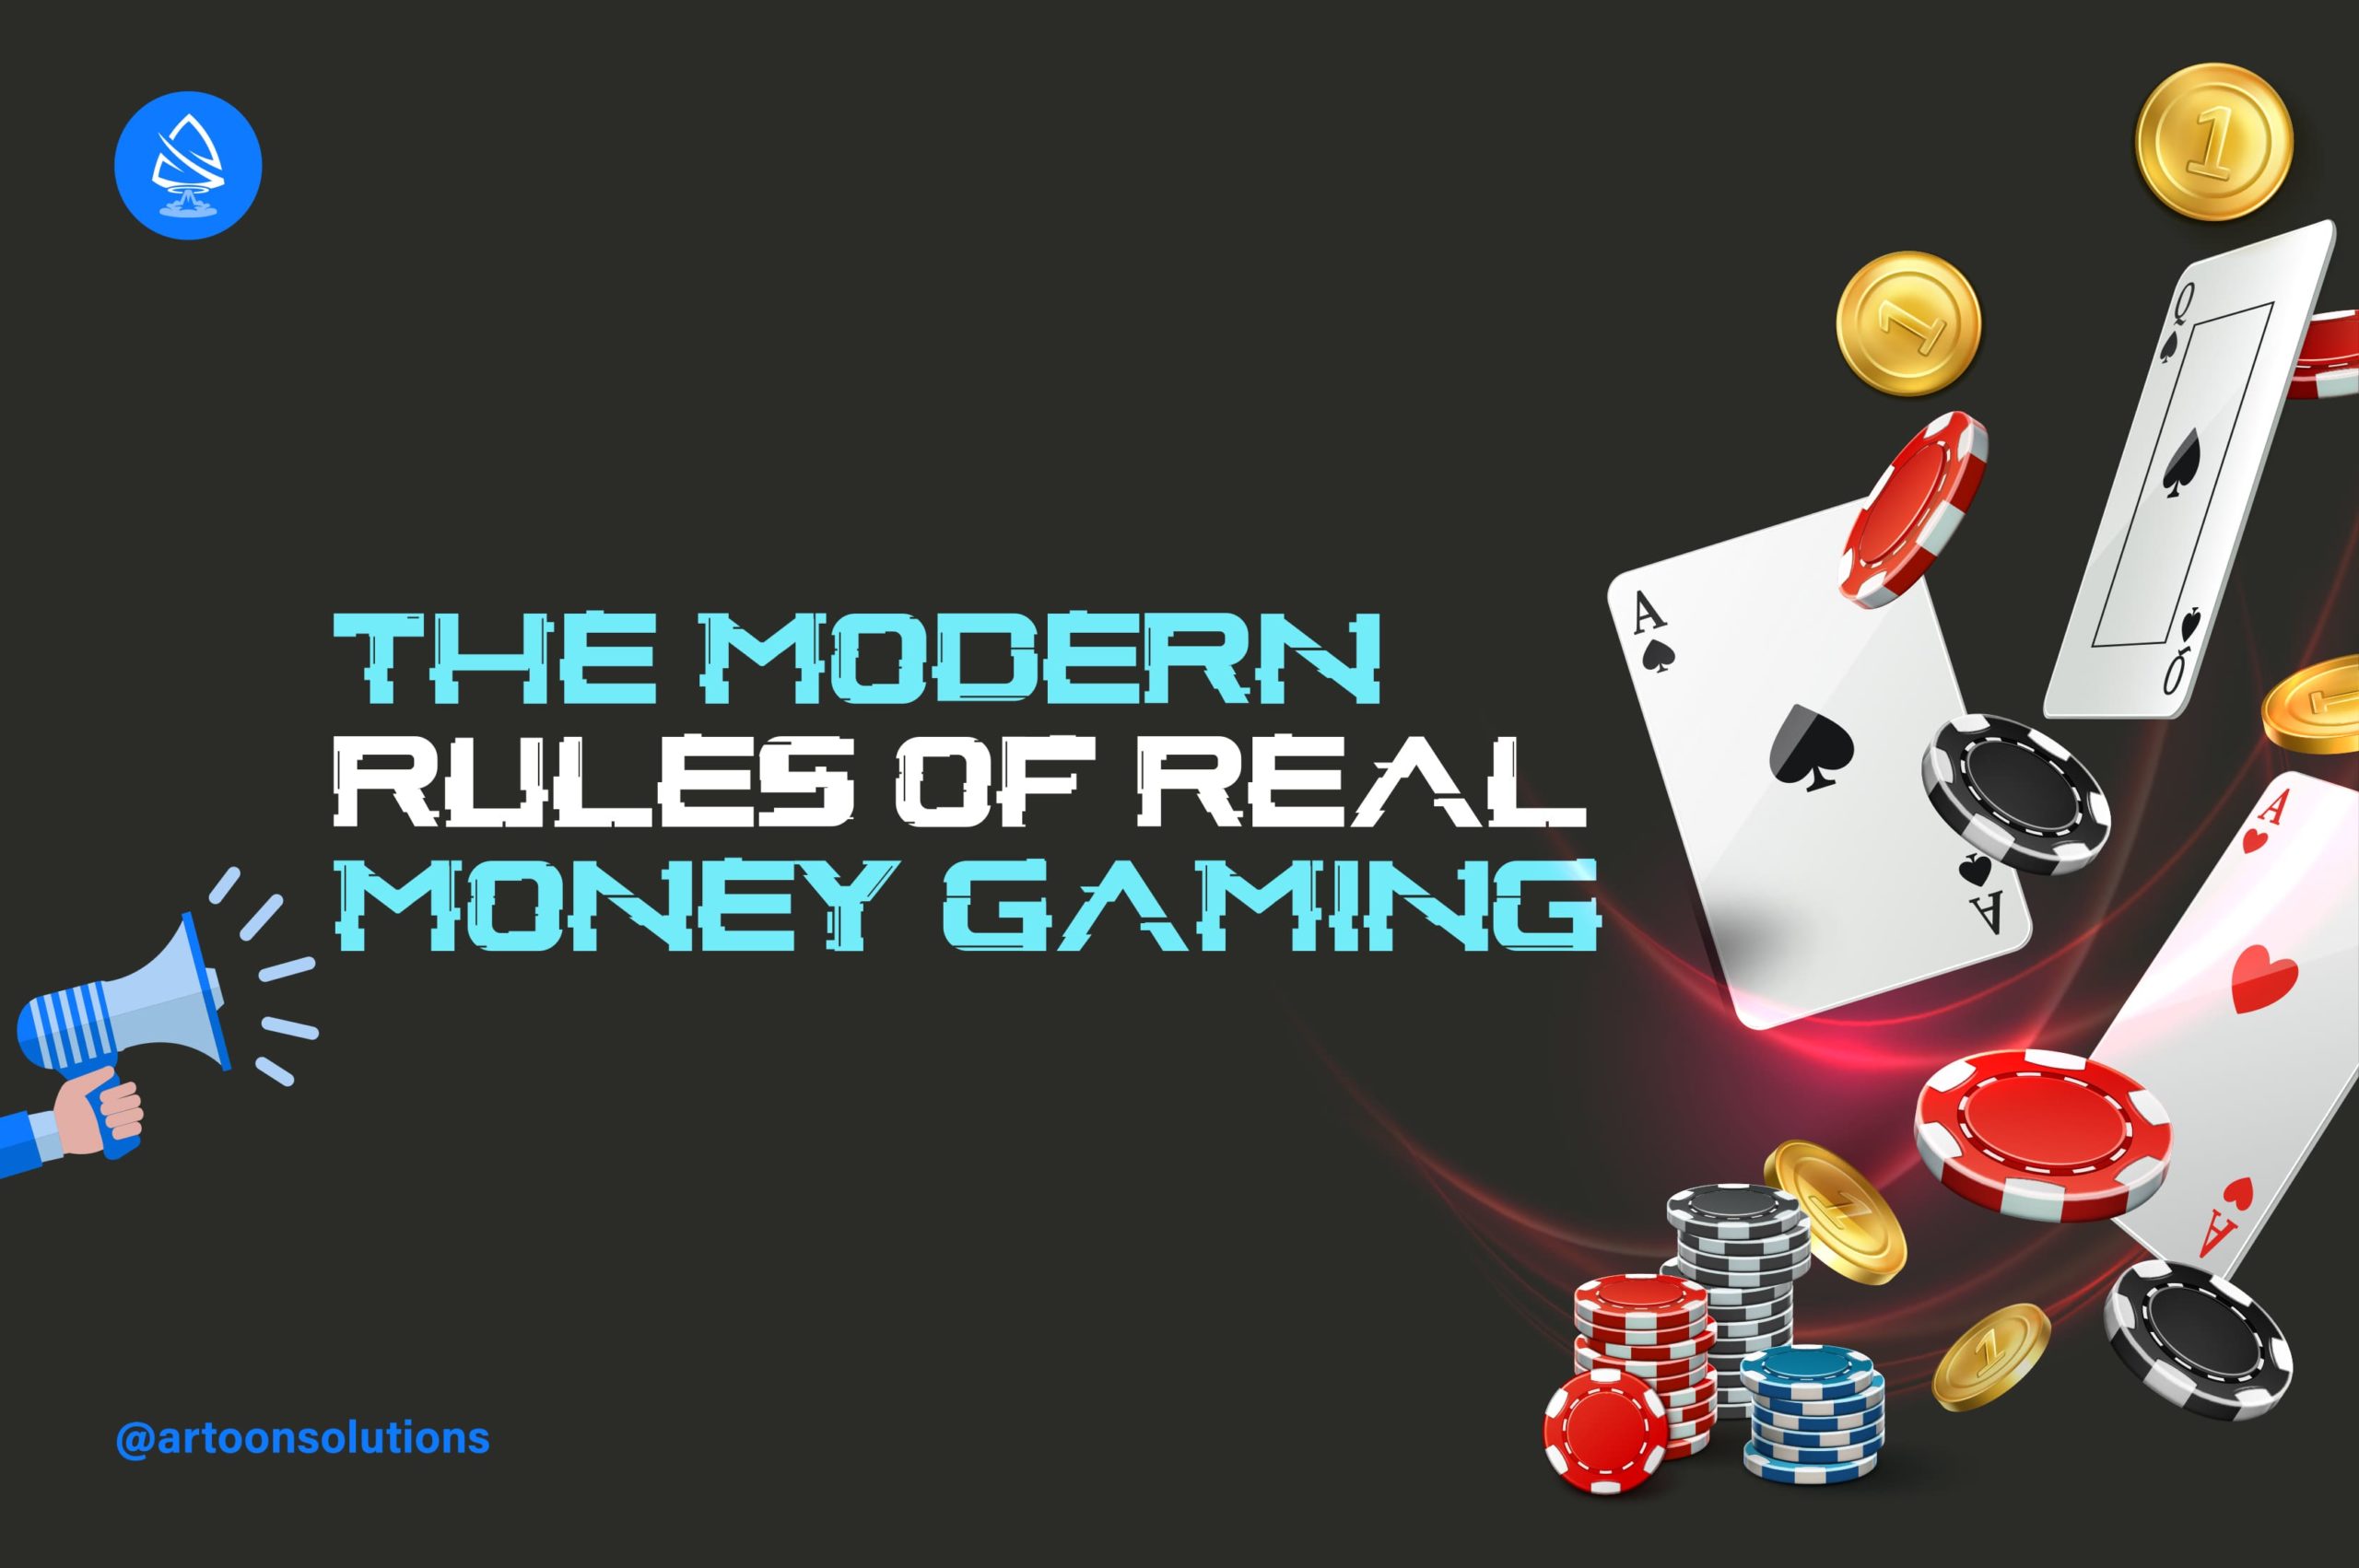 Real money games are also known as skill-based games where all types of games that include skill, strategy, tactics, proper game knowledge, and logical thinking are involved.